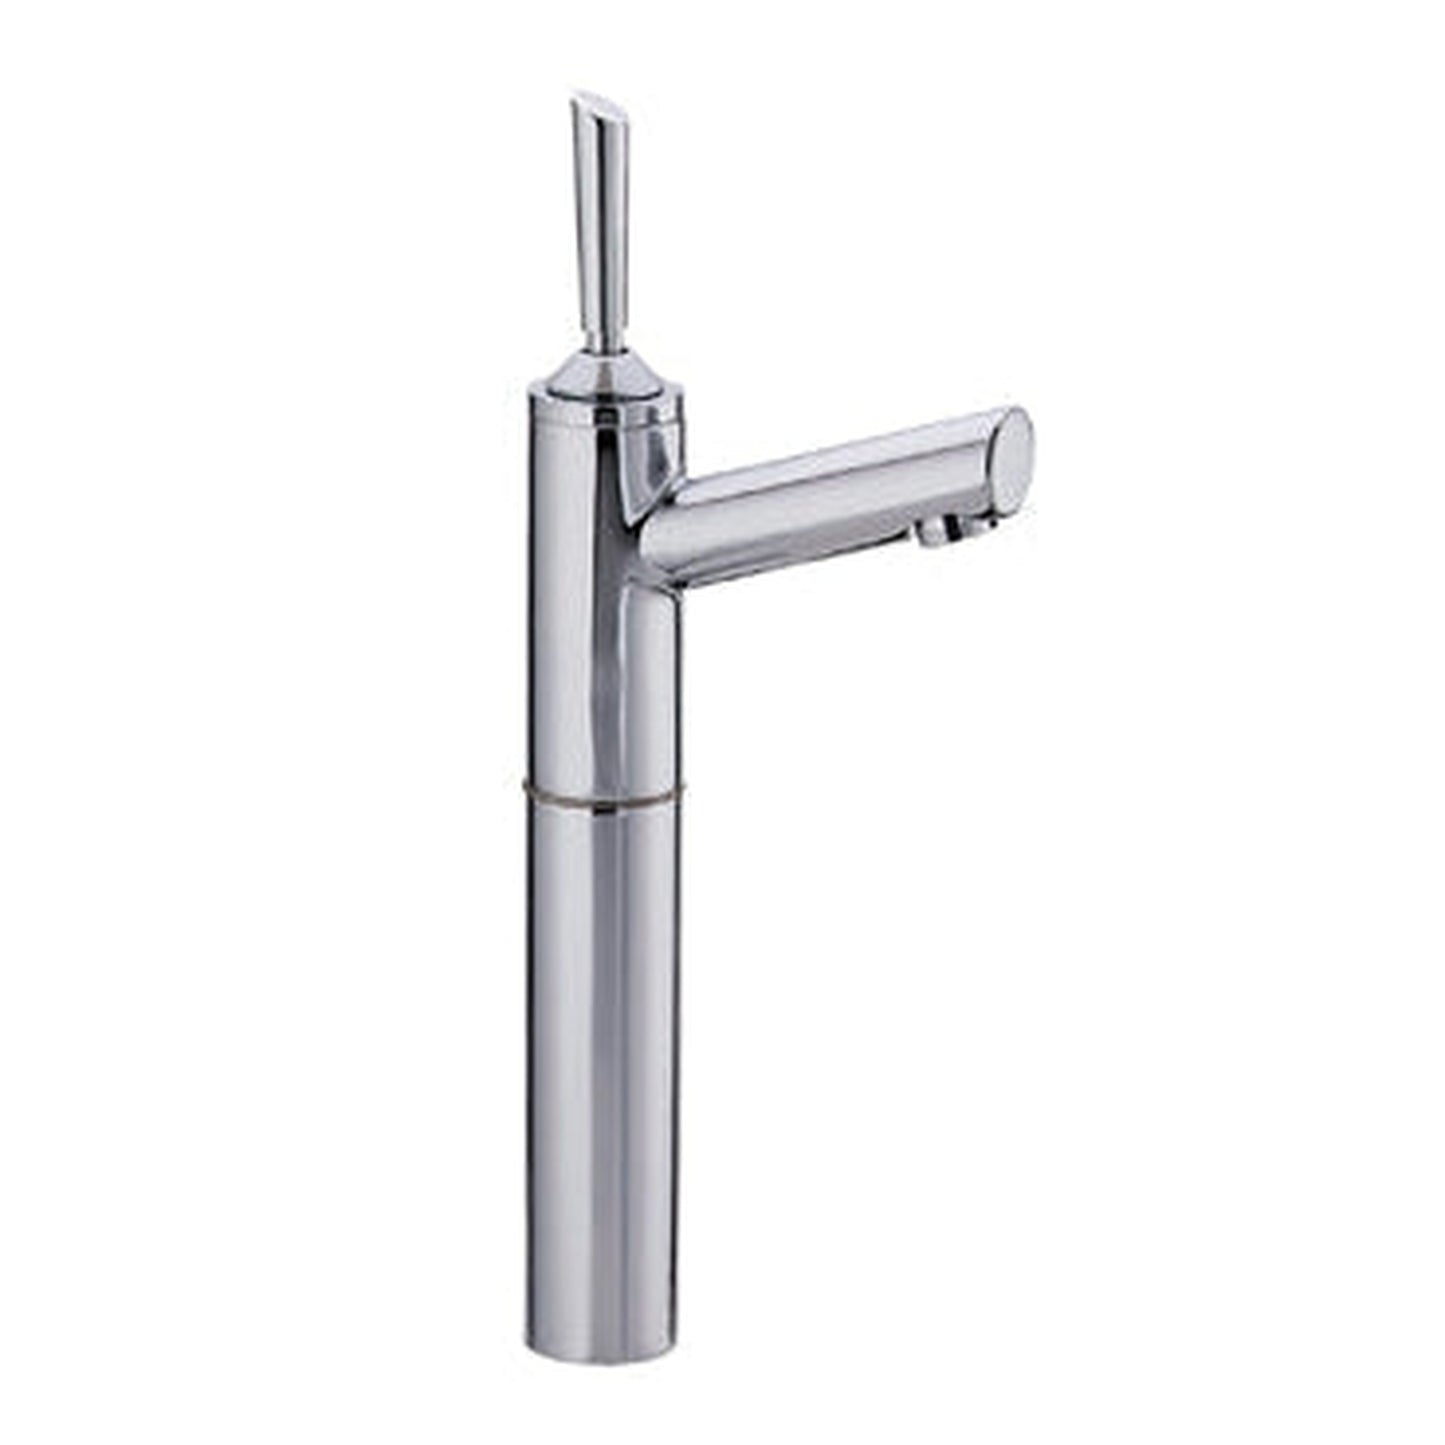 Whitehaus Centurion 3-3345-C Polished Chrome Single Hole Stick Handle Elevated Lavatory Faucet With 7” Extension and Short Spout